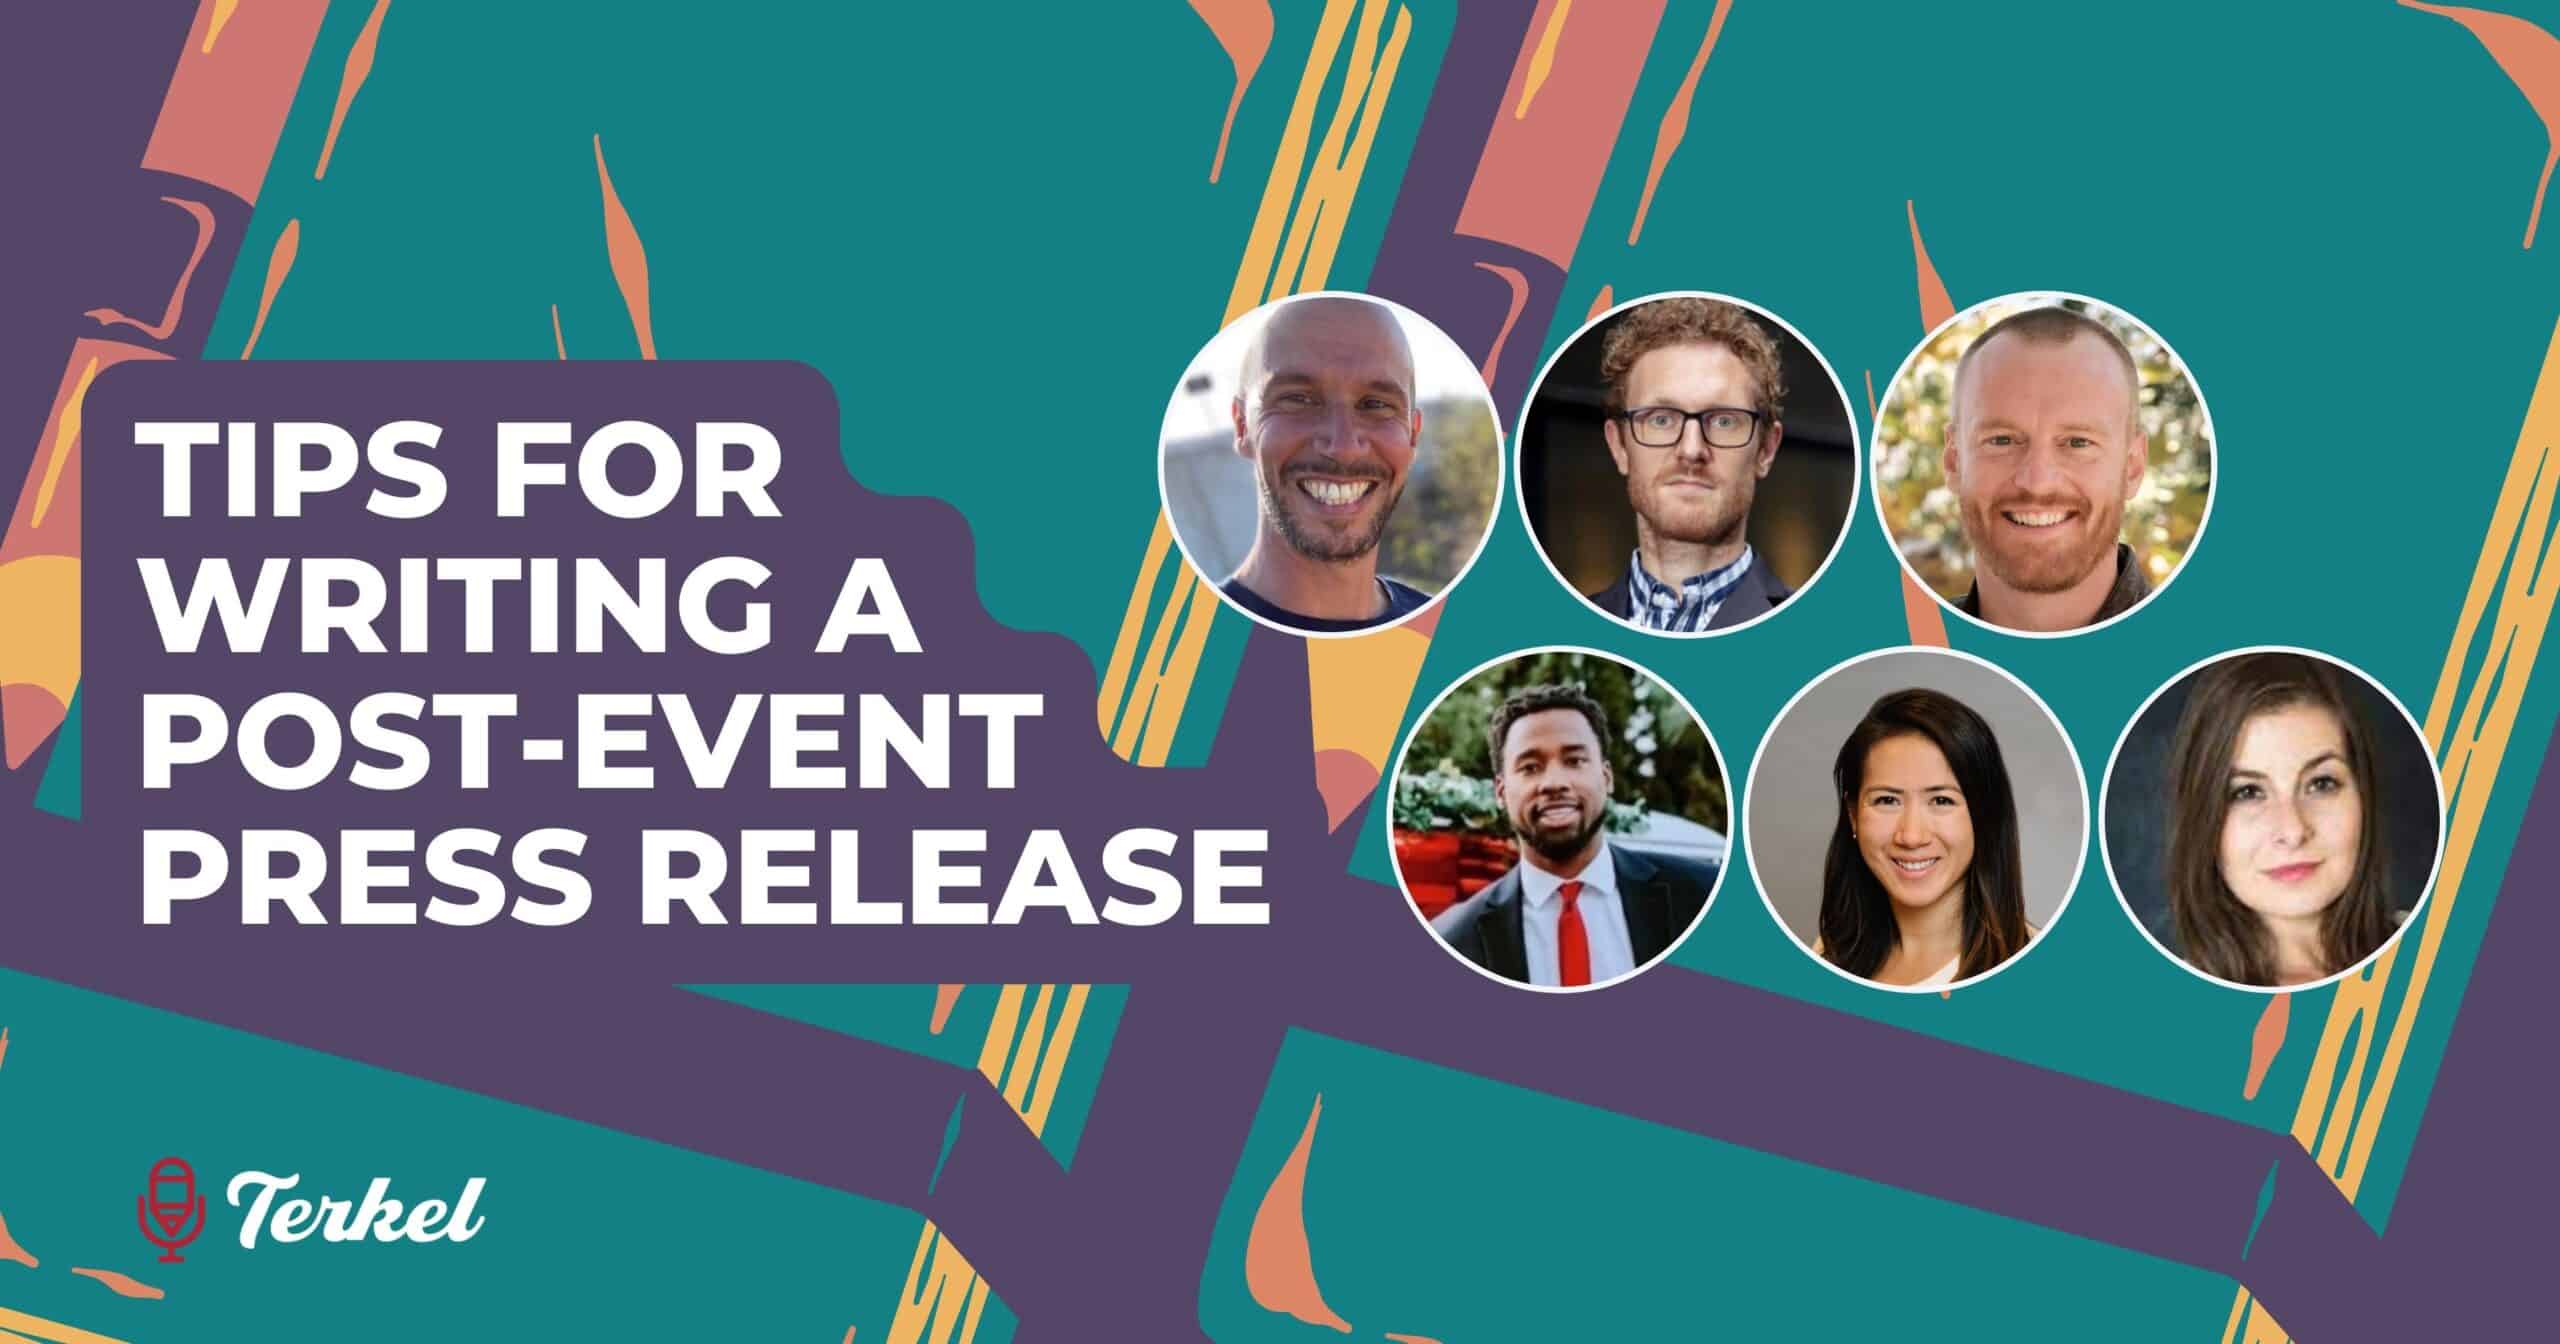 Tips for Writing a Post-Event Press Release